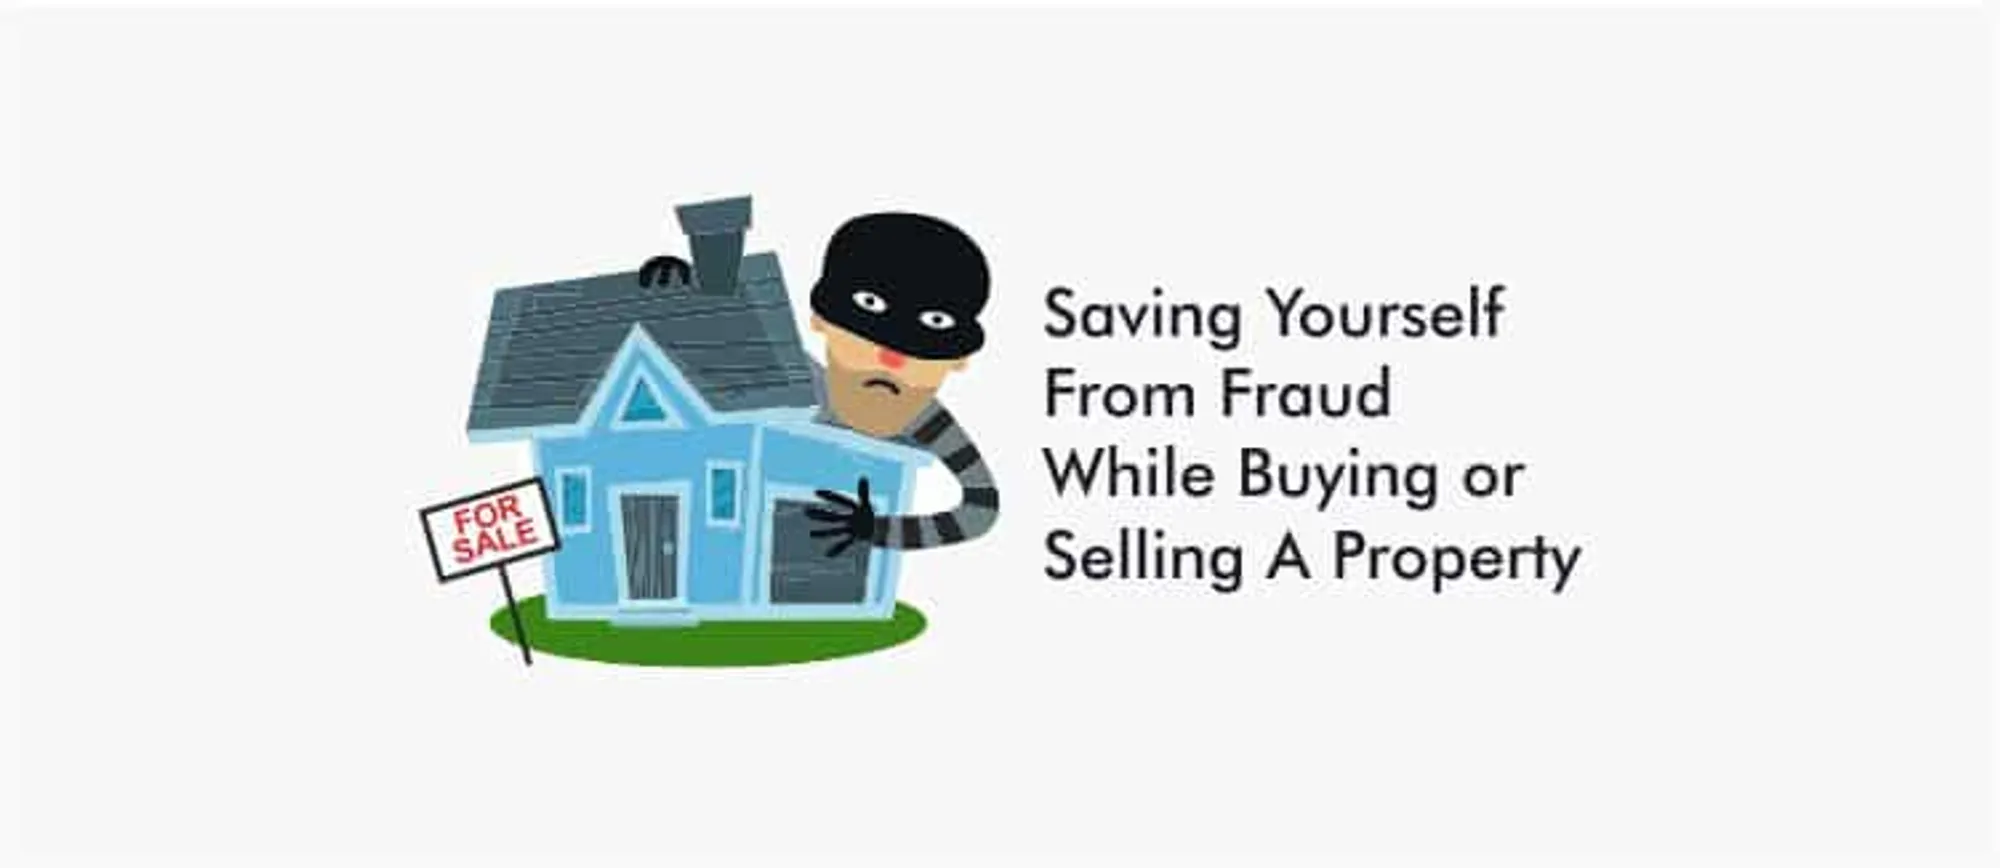 Saving yourself from fraud while buying or selling a property